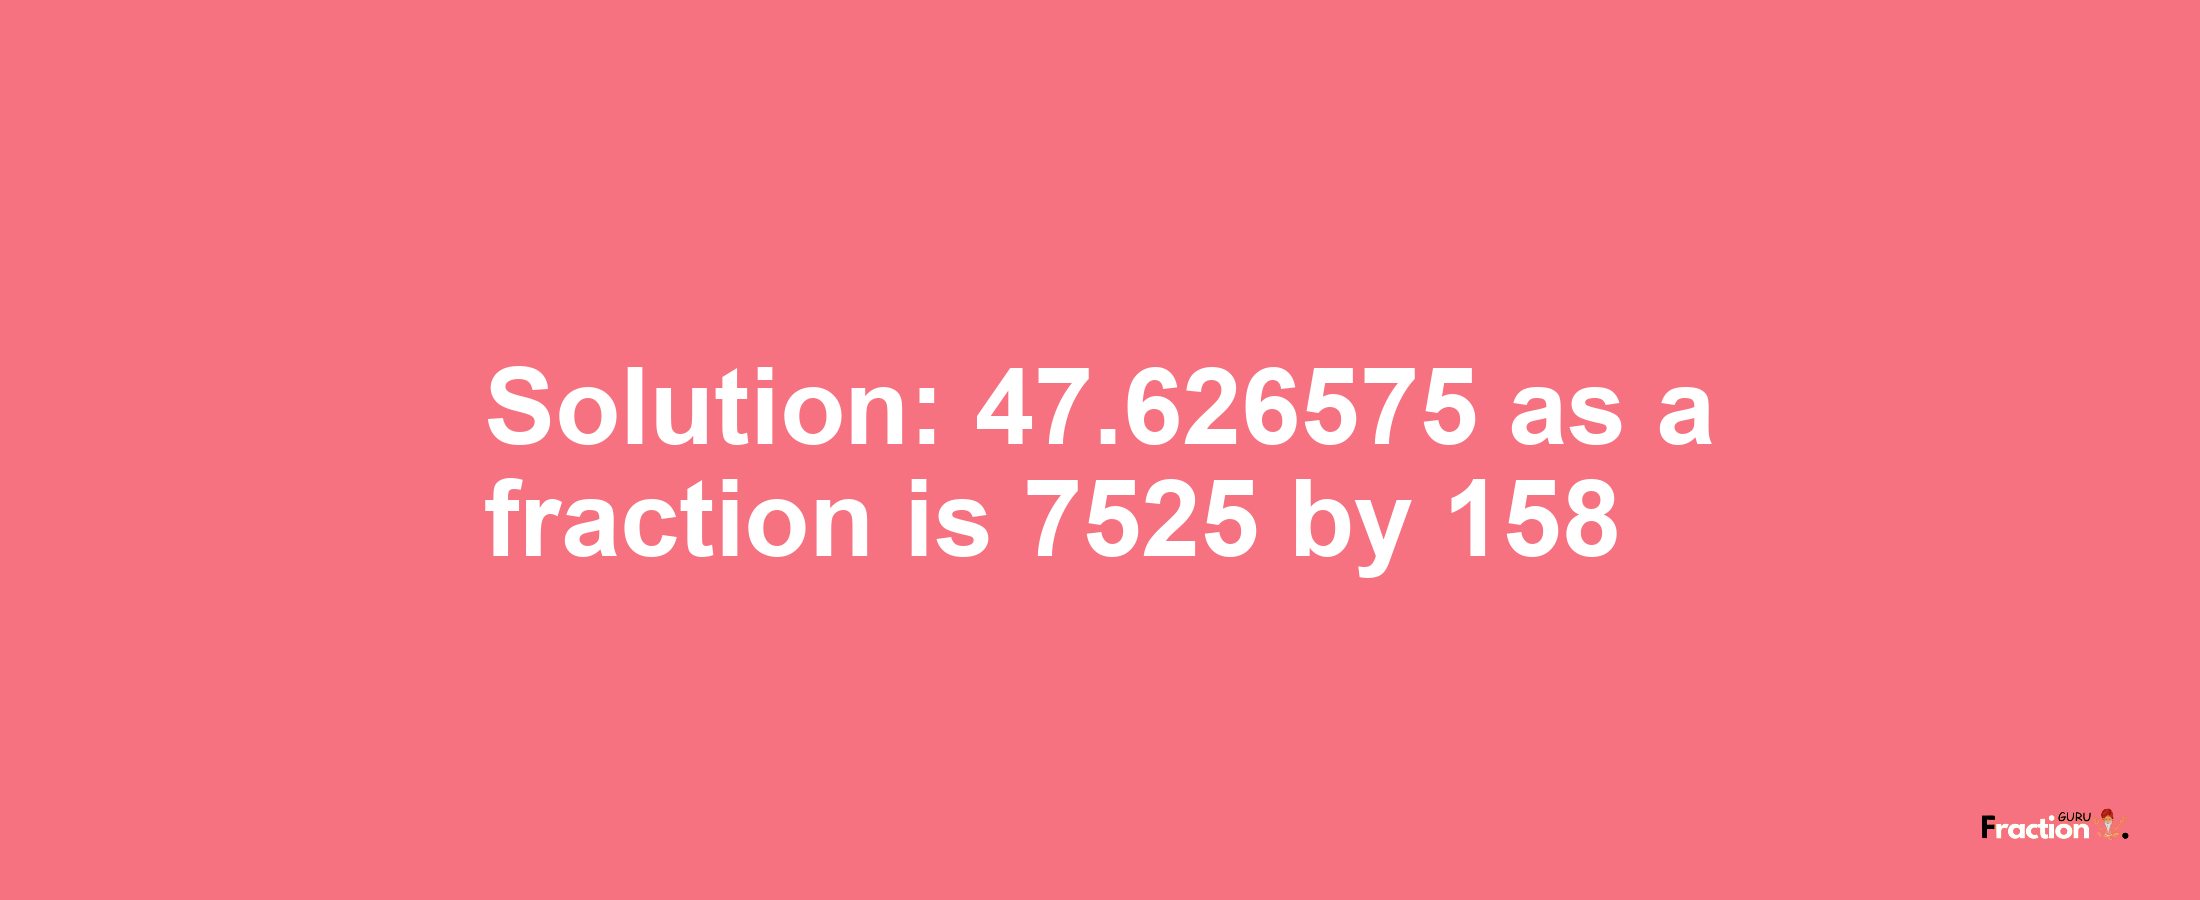 Solution:47.626575 as a fraction is 7525/158